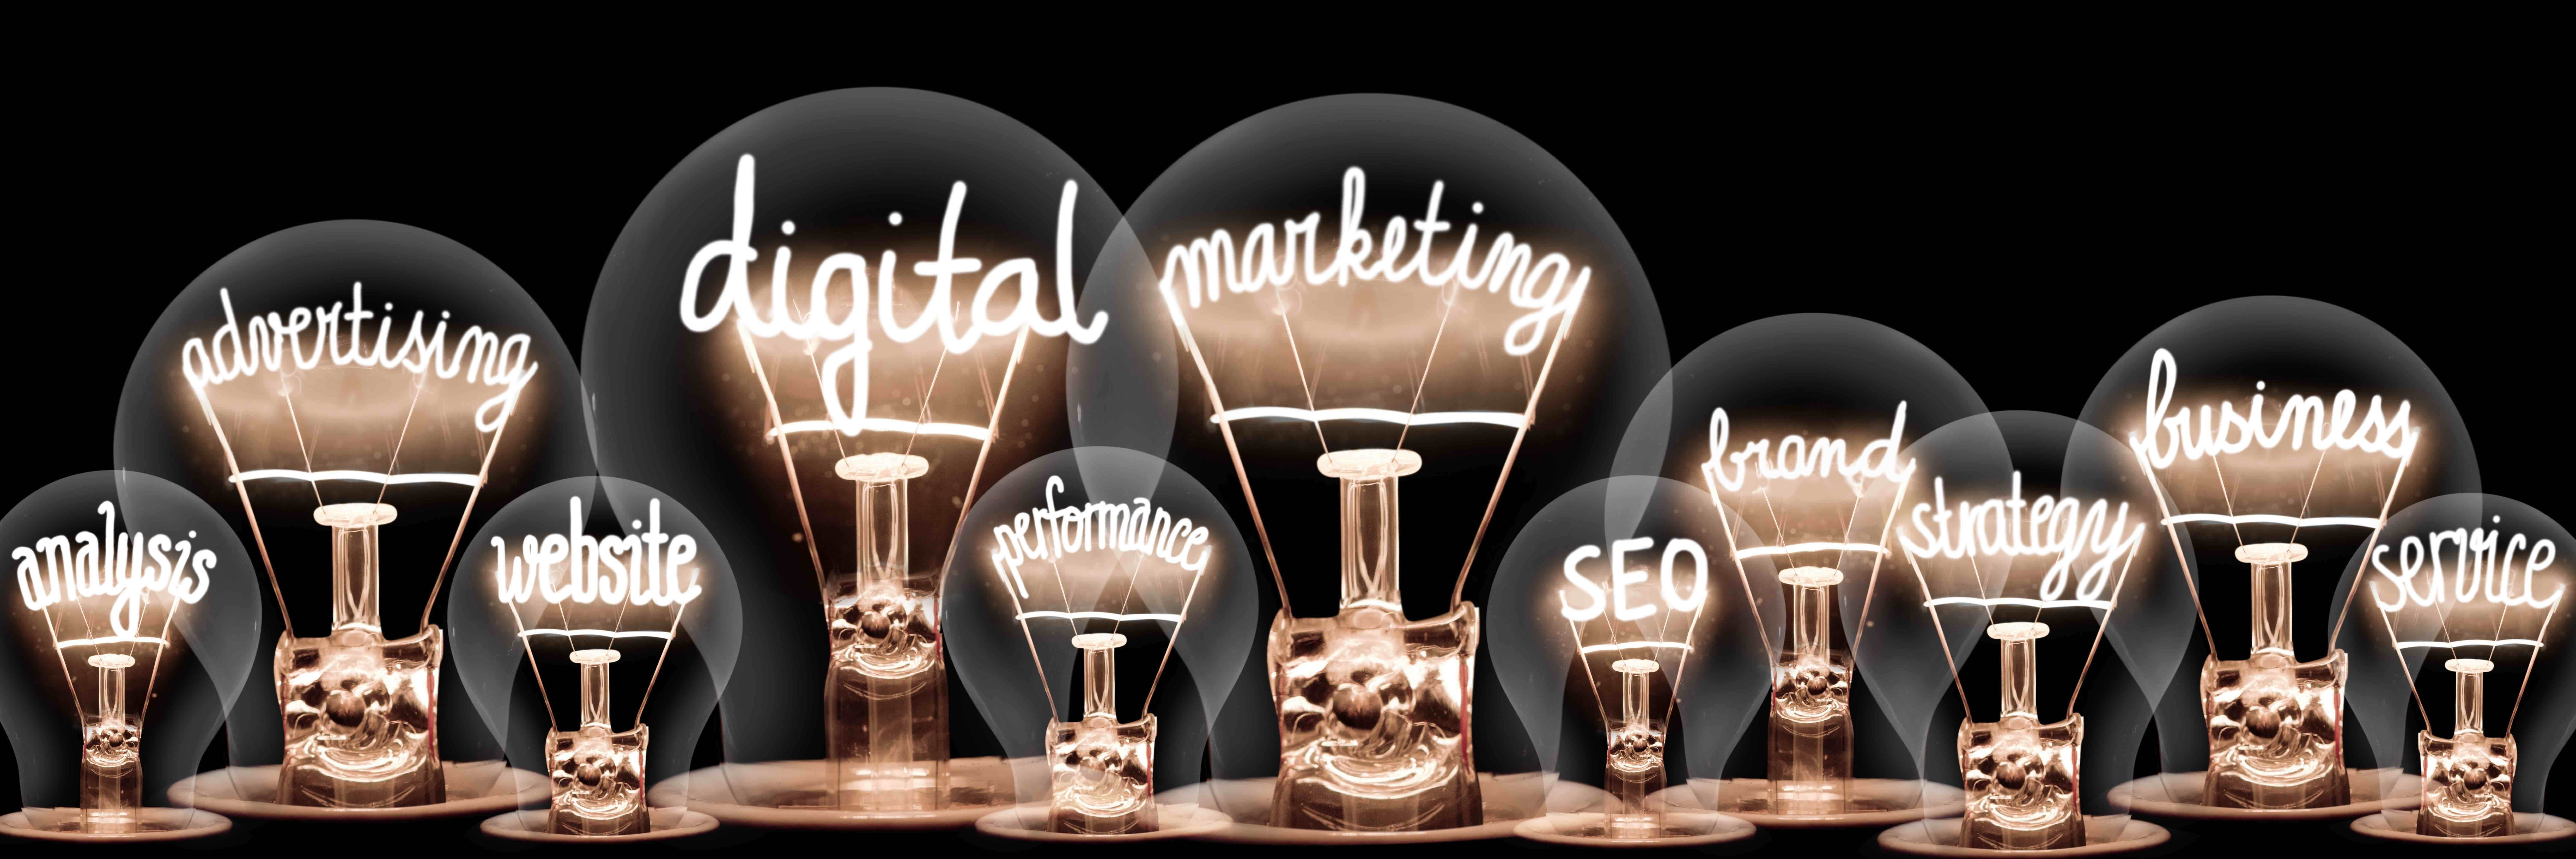 Graphic of lightbulbs with marketing buzzwords lit up